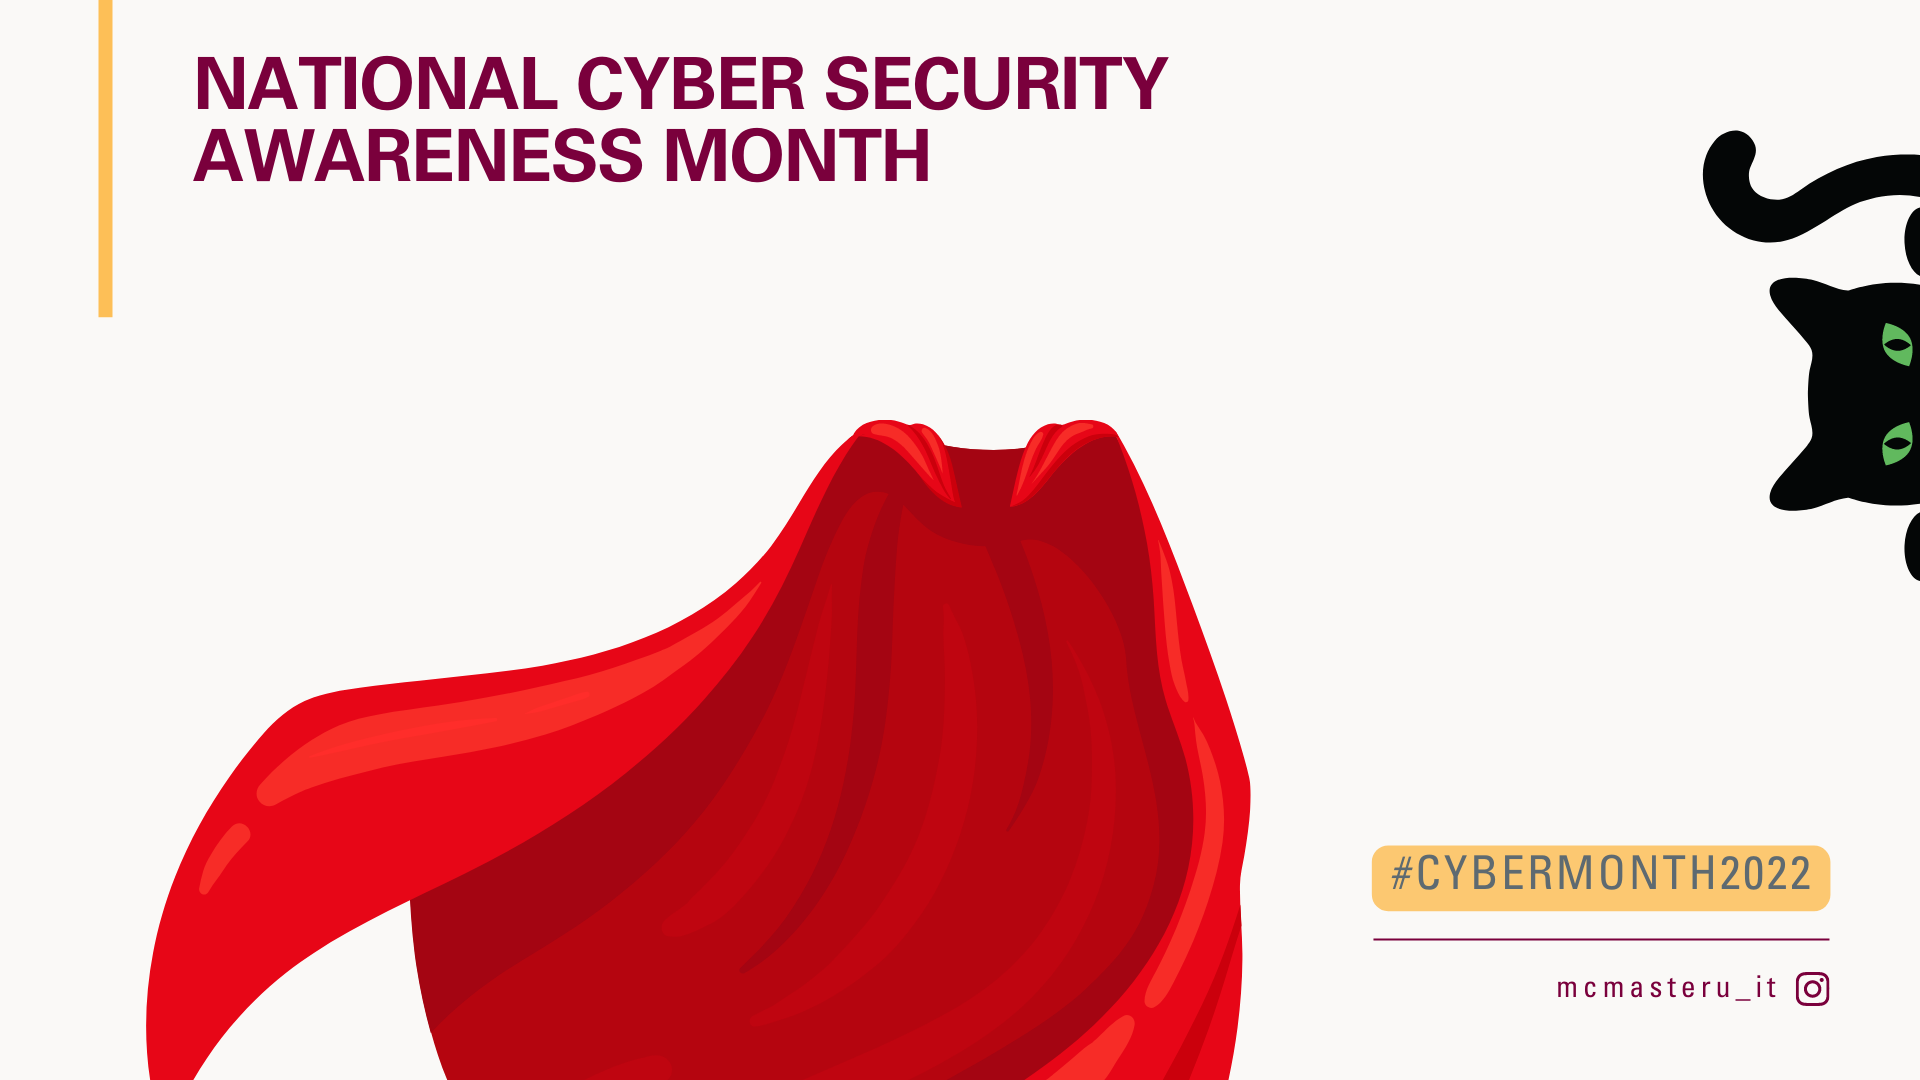 National Cyber Security Awareness Month 2022 with cape and cyber cat background